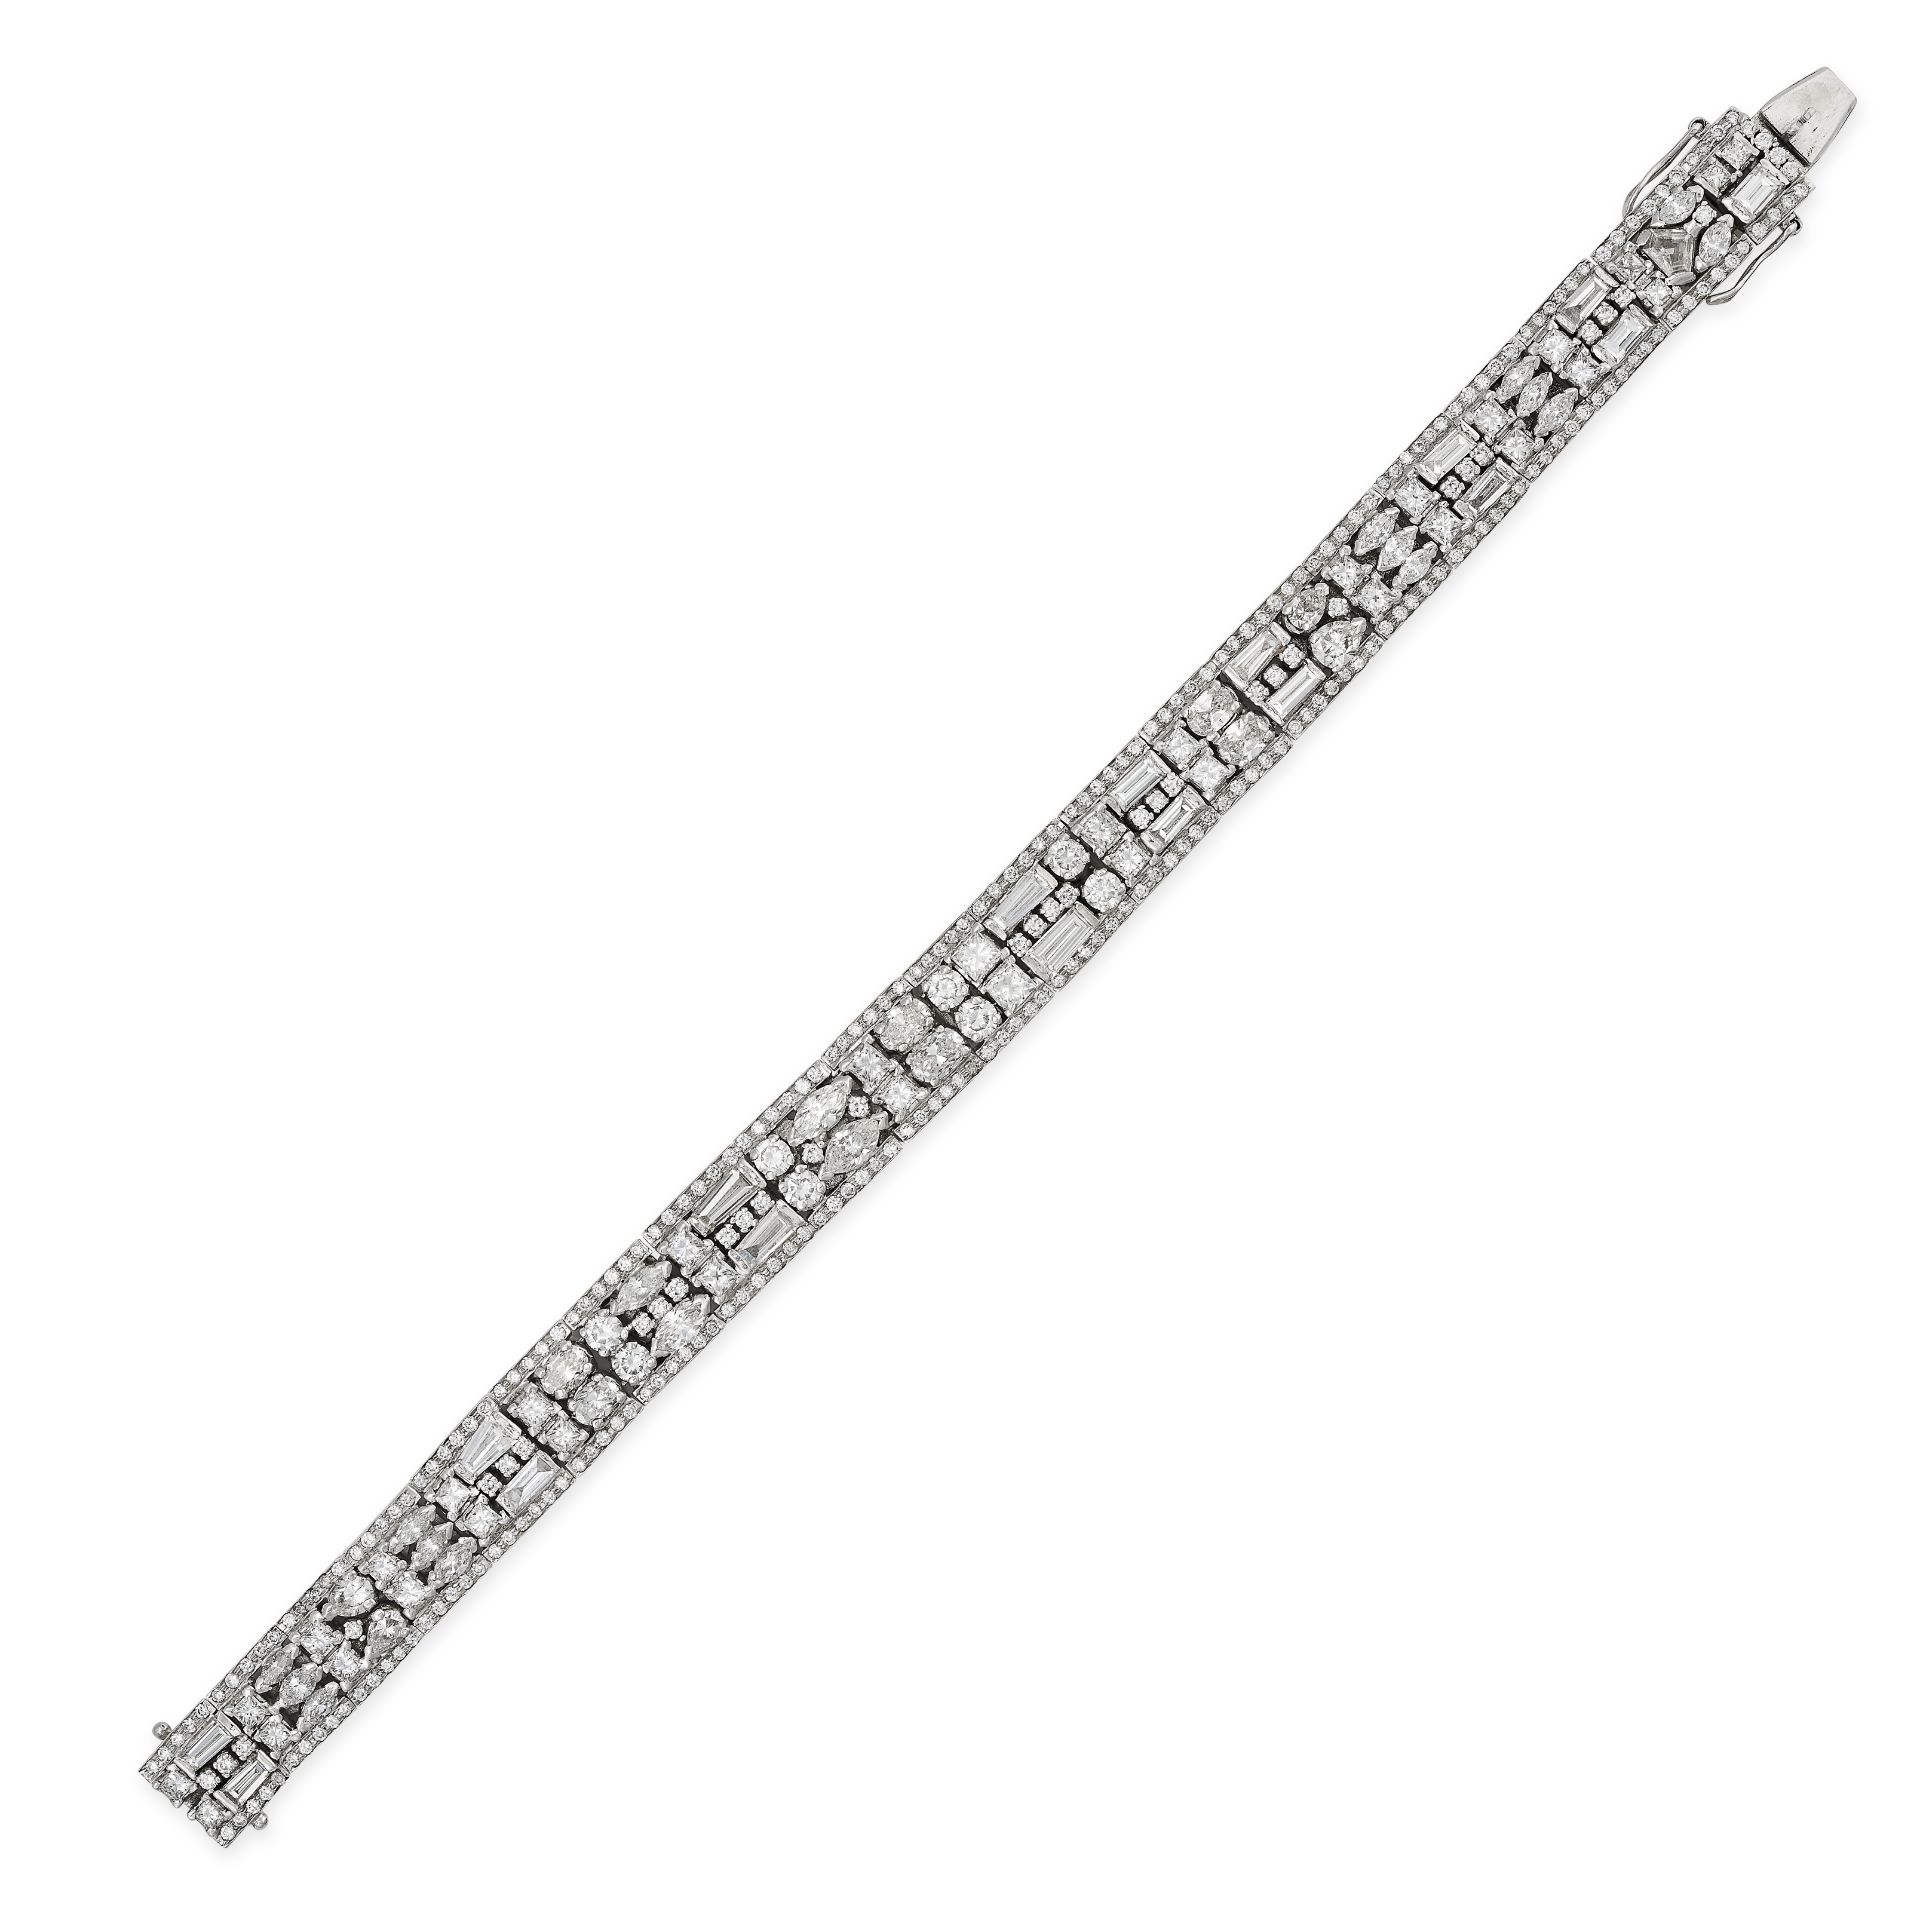 A DIAMOND BRACELET in 18ct white gold, set with two rows of tapered baguette, marquise, princess,